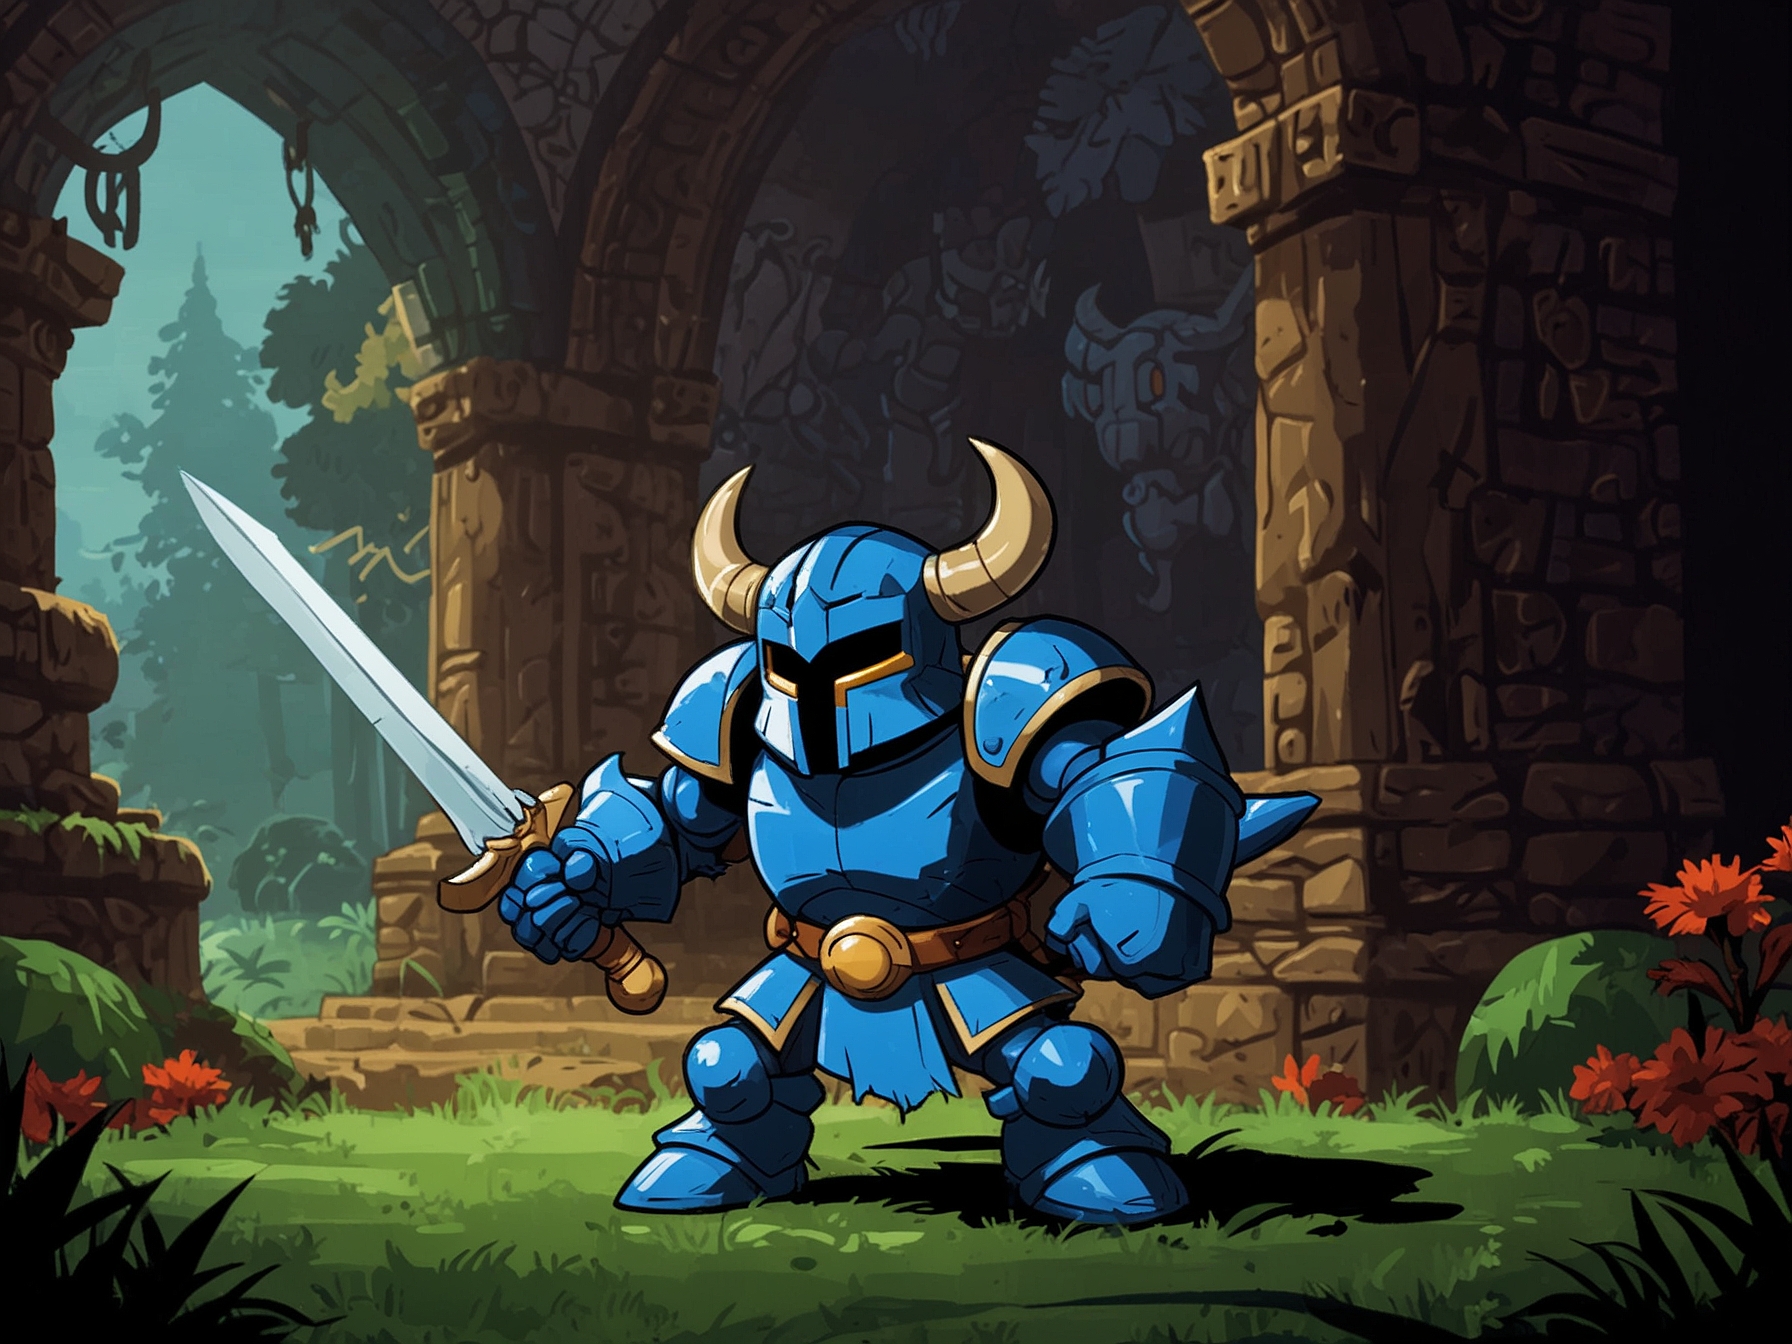 Screenshot of Shovel Knight in action, demonstrating retro-style graphics and engaging gameplay.